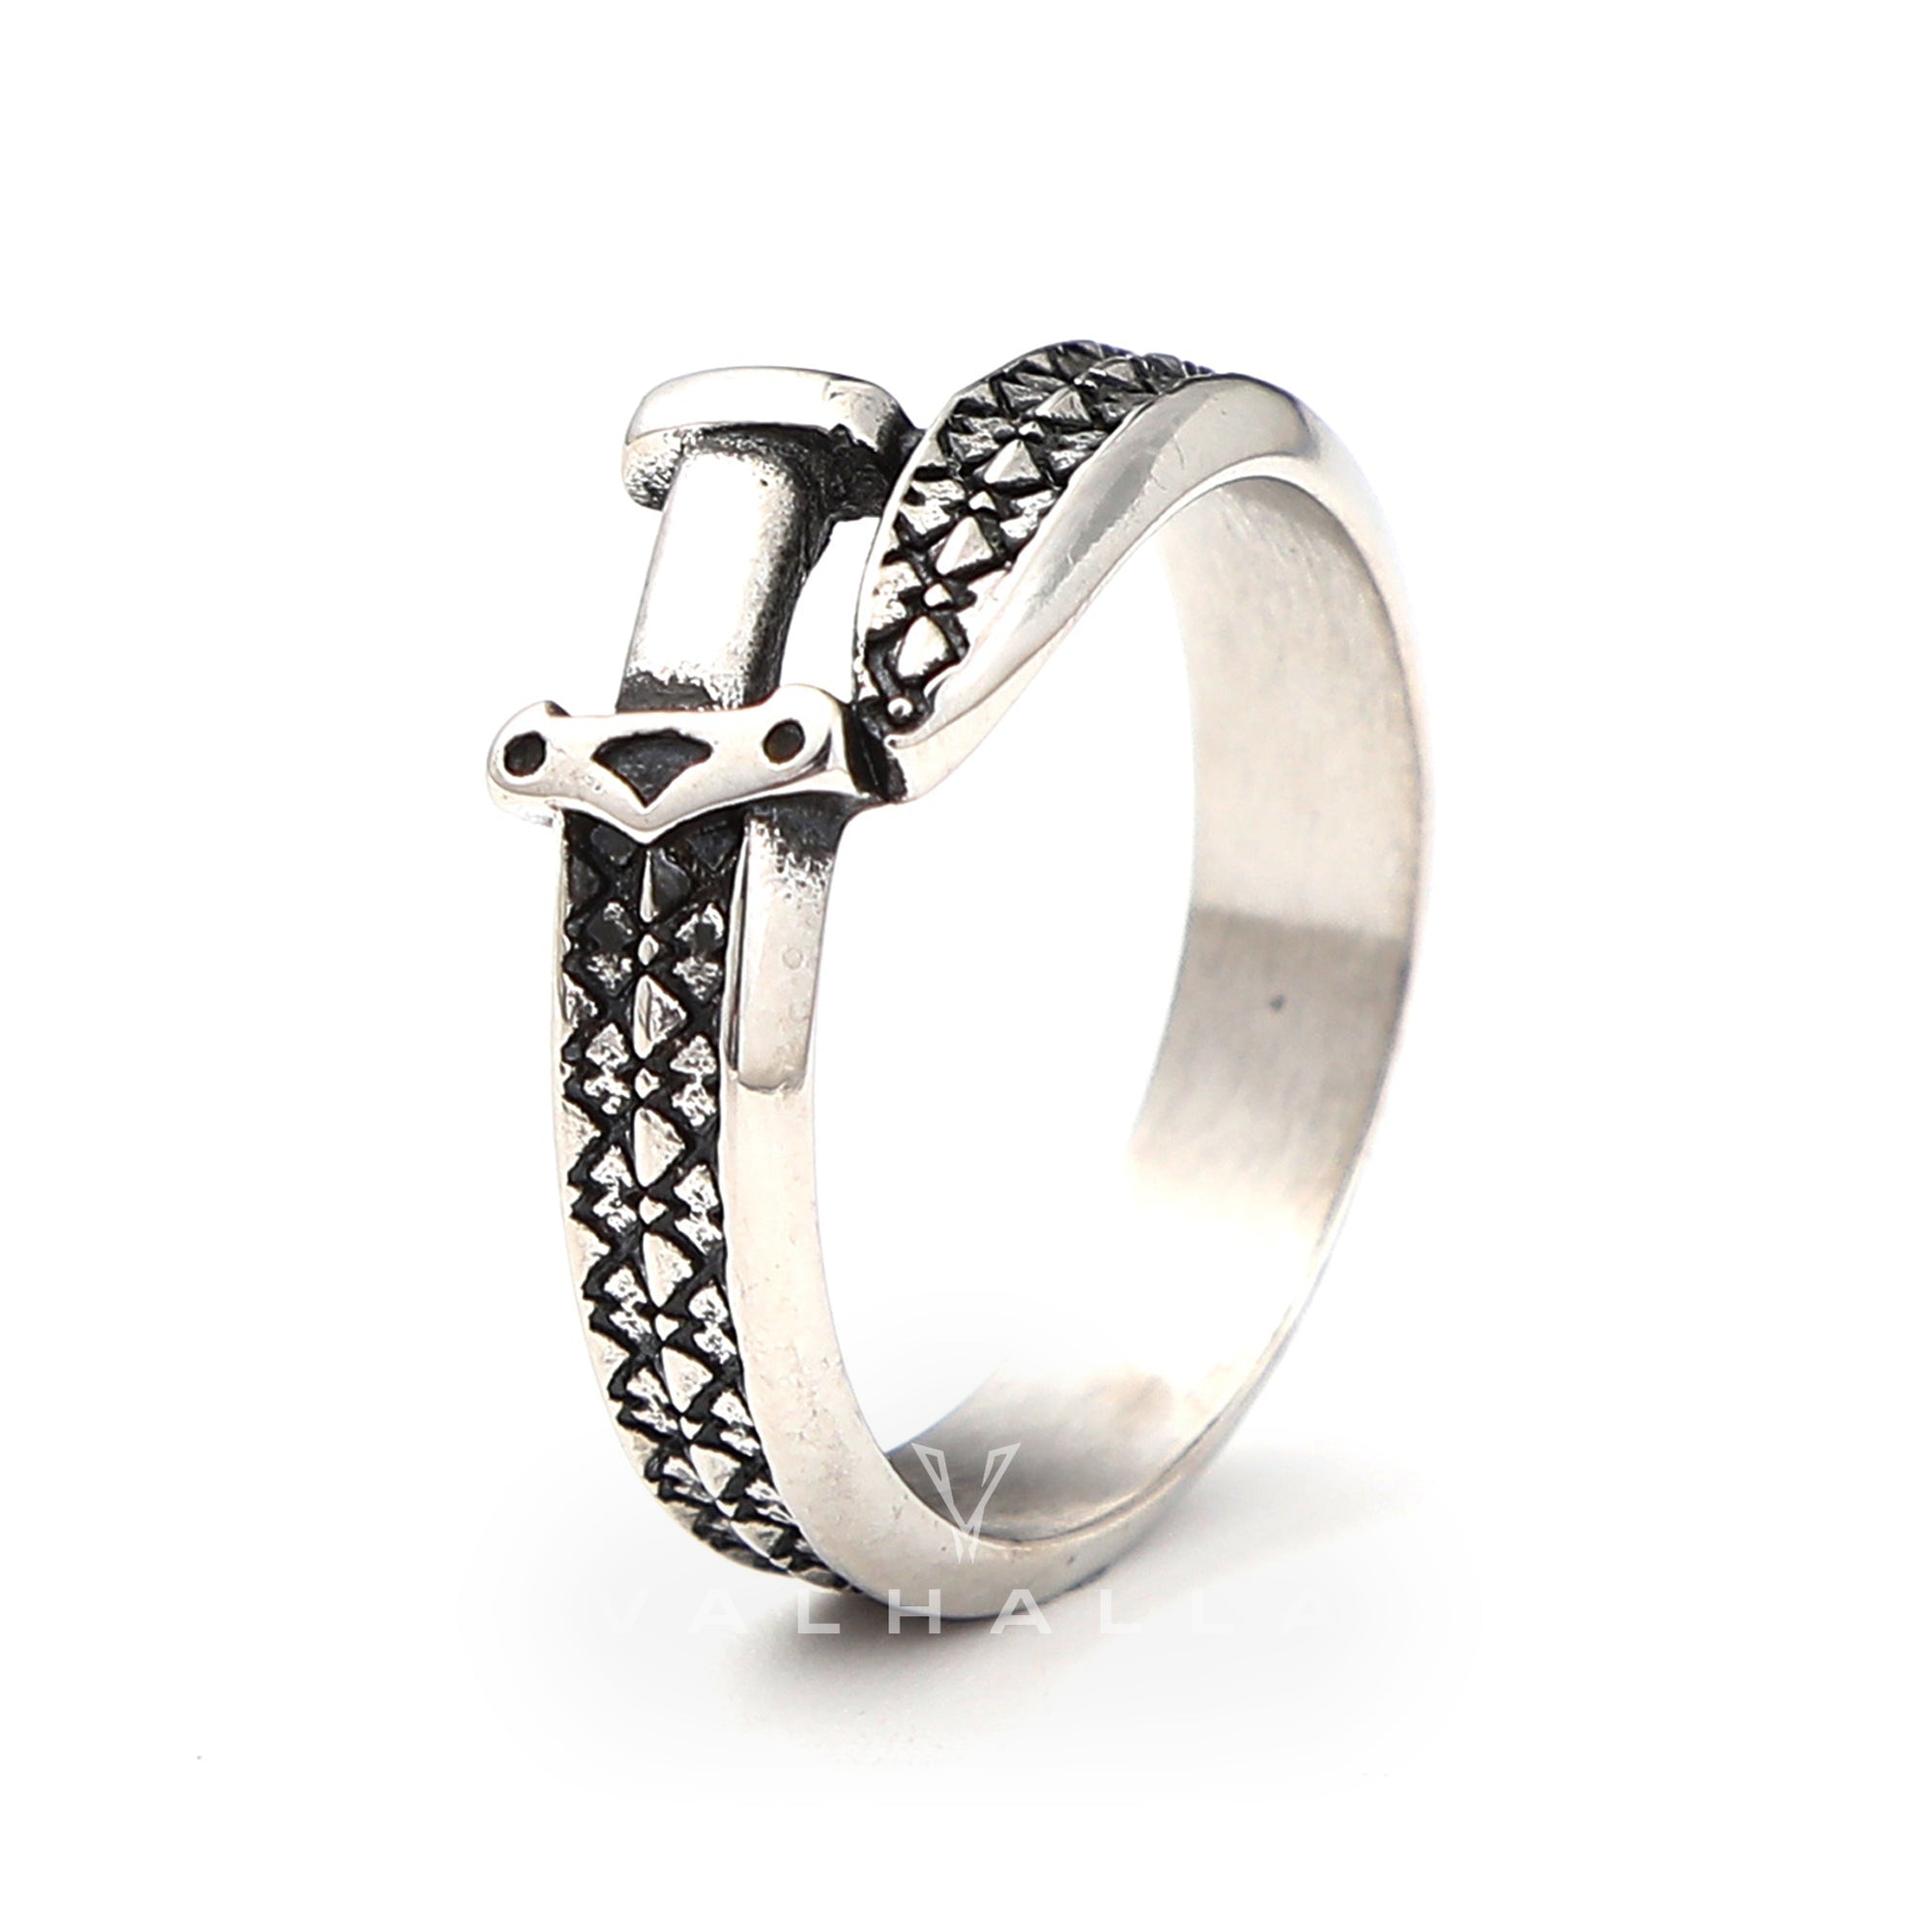 Punk Curved Sword Stainless Steel Ring